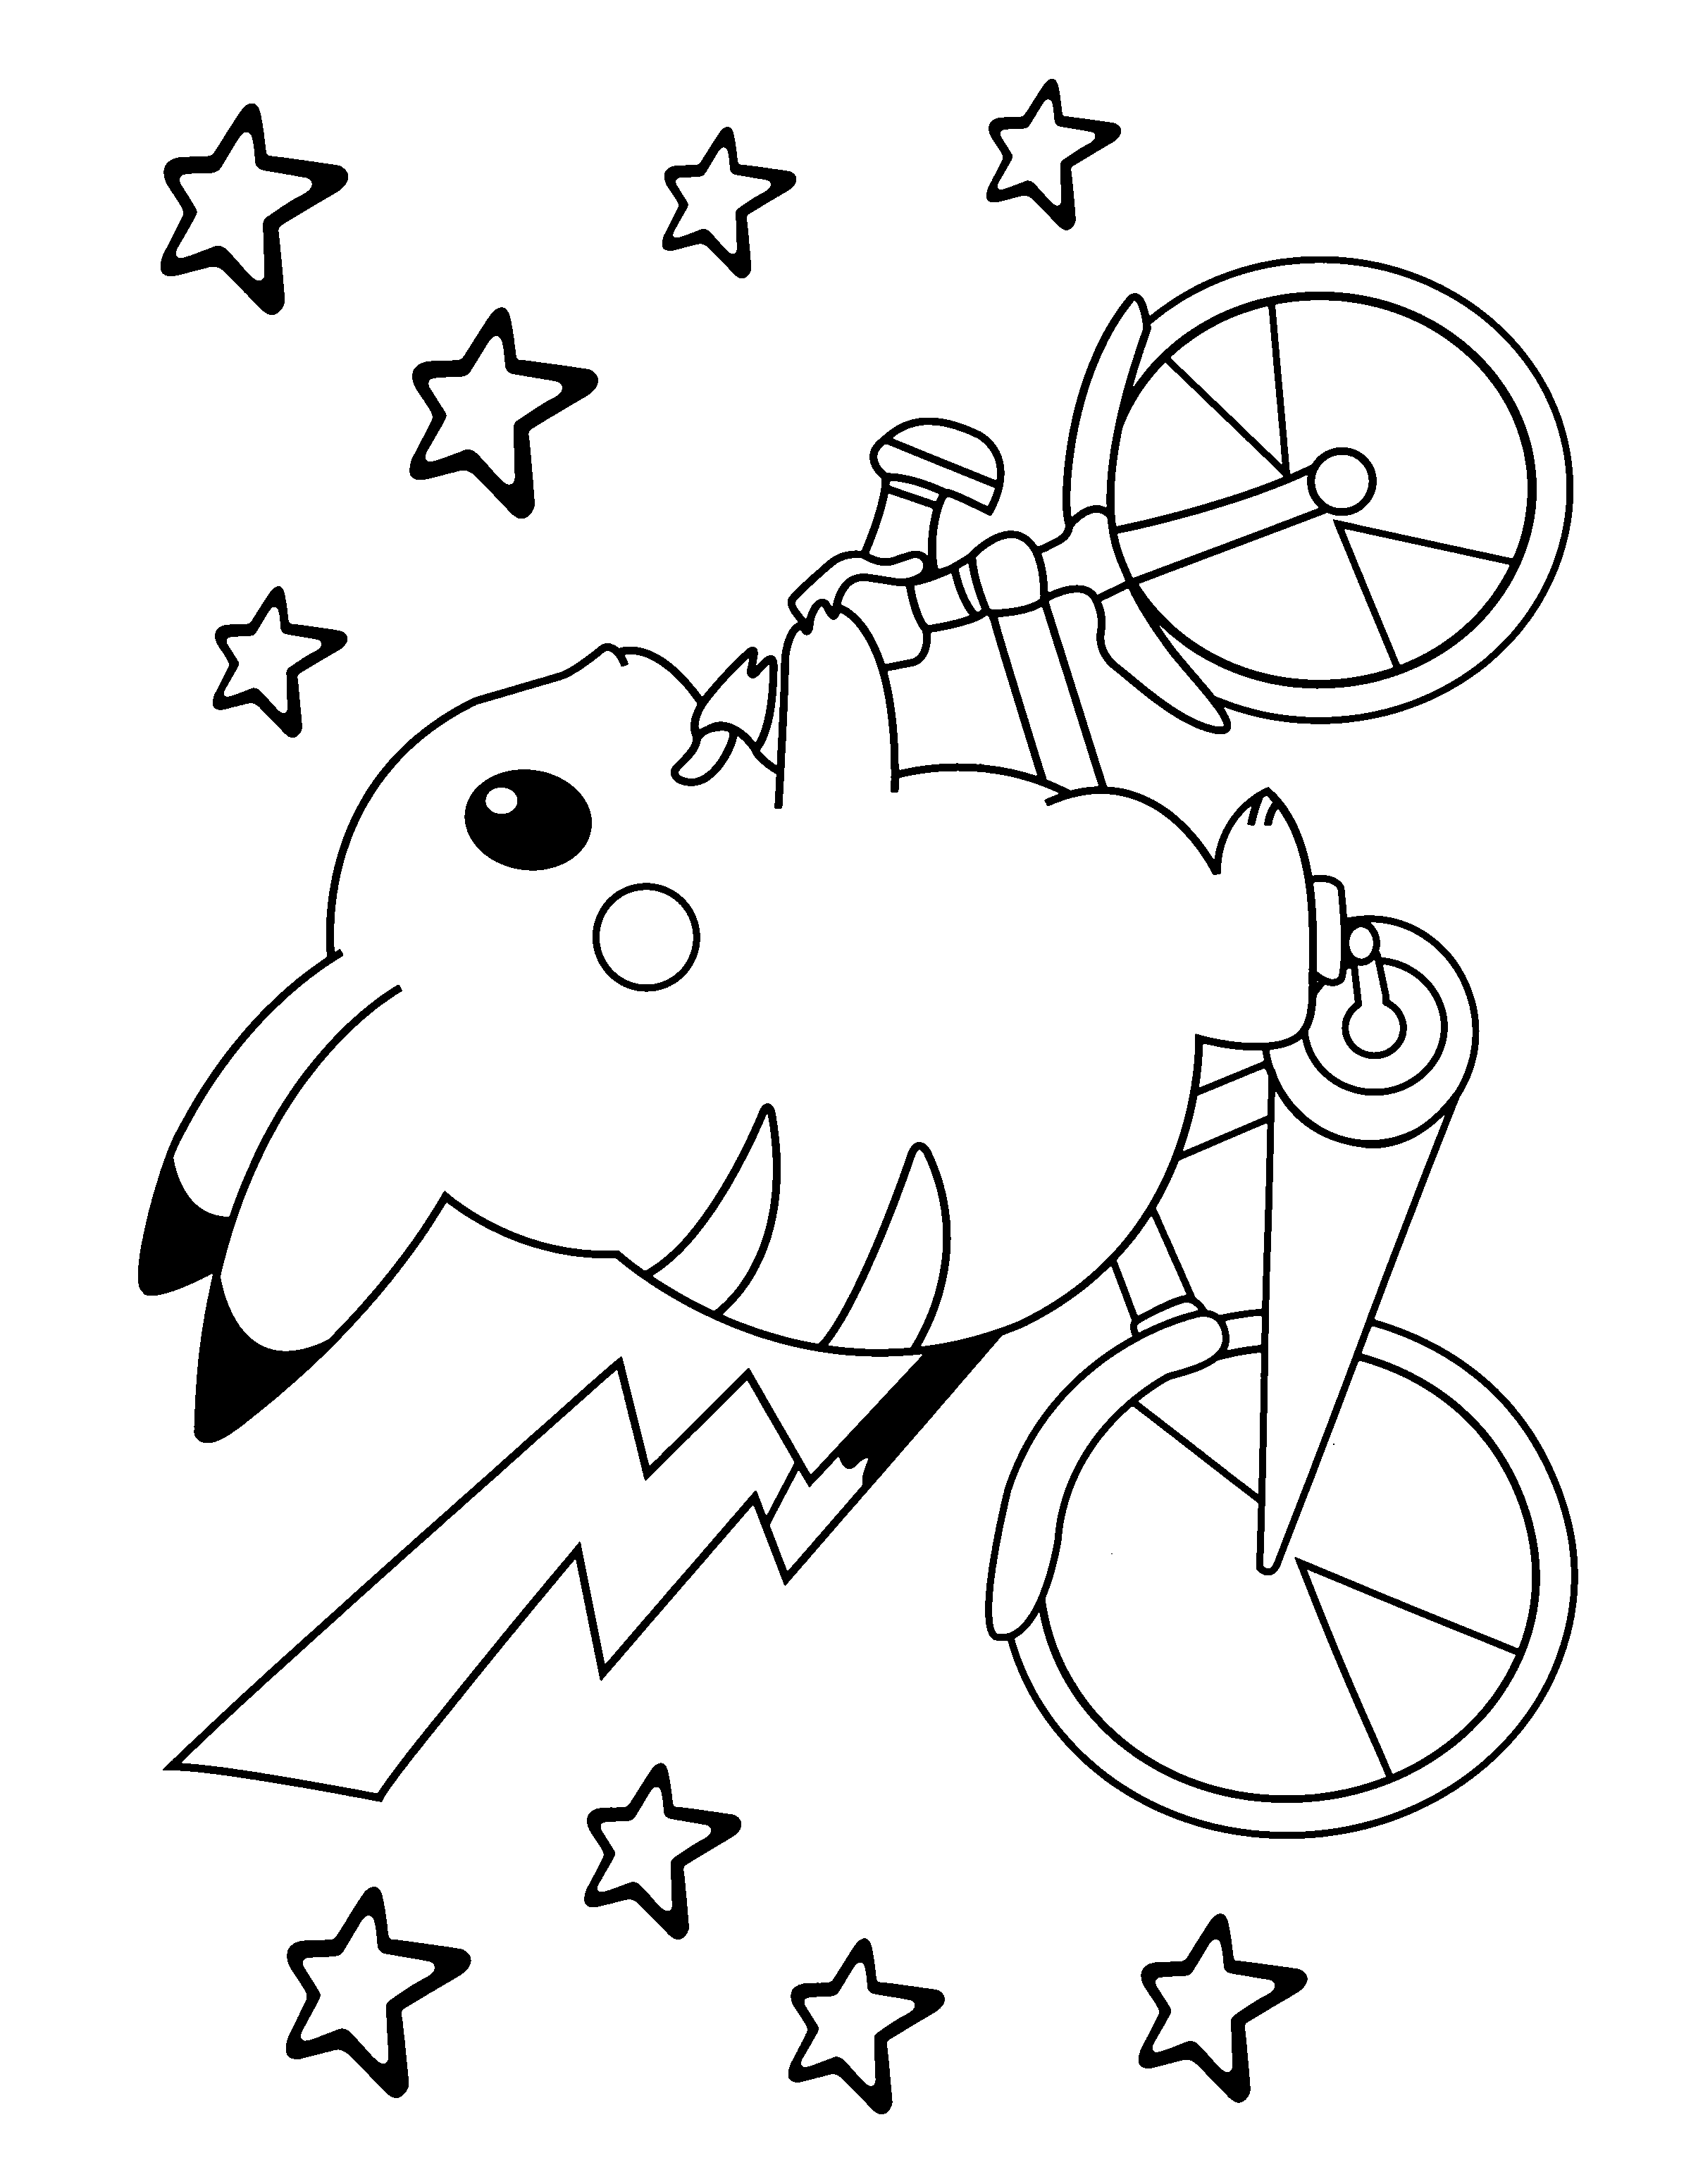 animated-coloring-pages-pokemon-image-0100